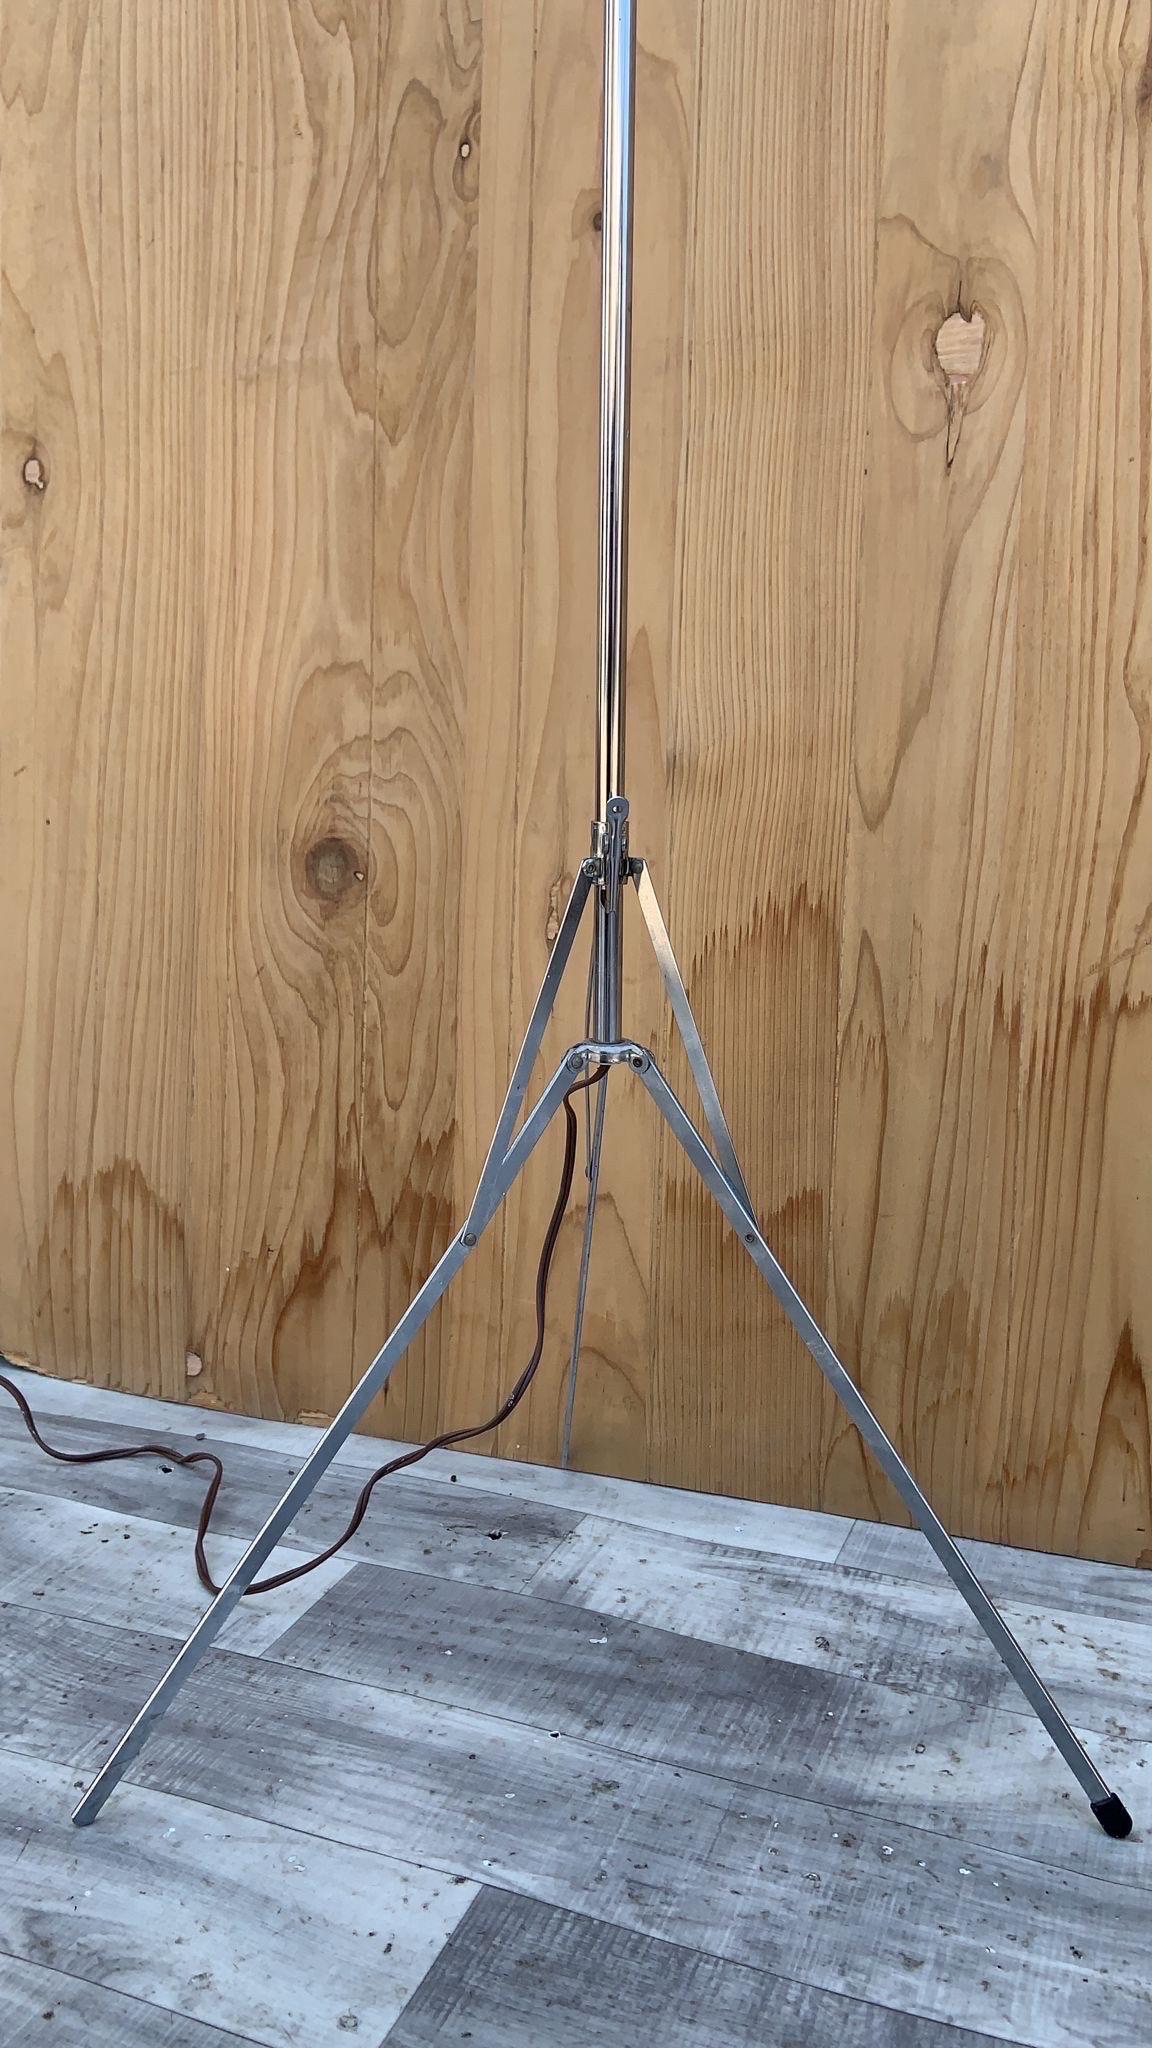 Mid Century Modern Space Age Extending Chrome Tripod Floor Lamp

A mid century modern adjustable atomic style tripod floor lamp with its original chrome finish. The head of the lamp can be tilted to adjust the angle of the light.

Circa